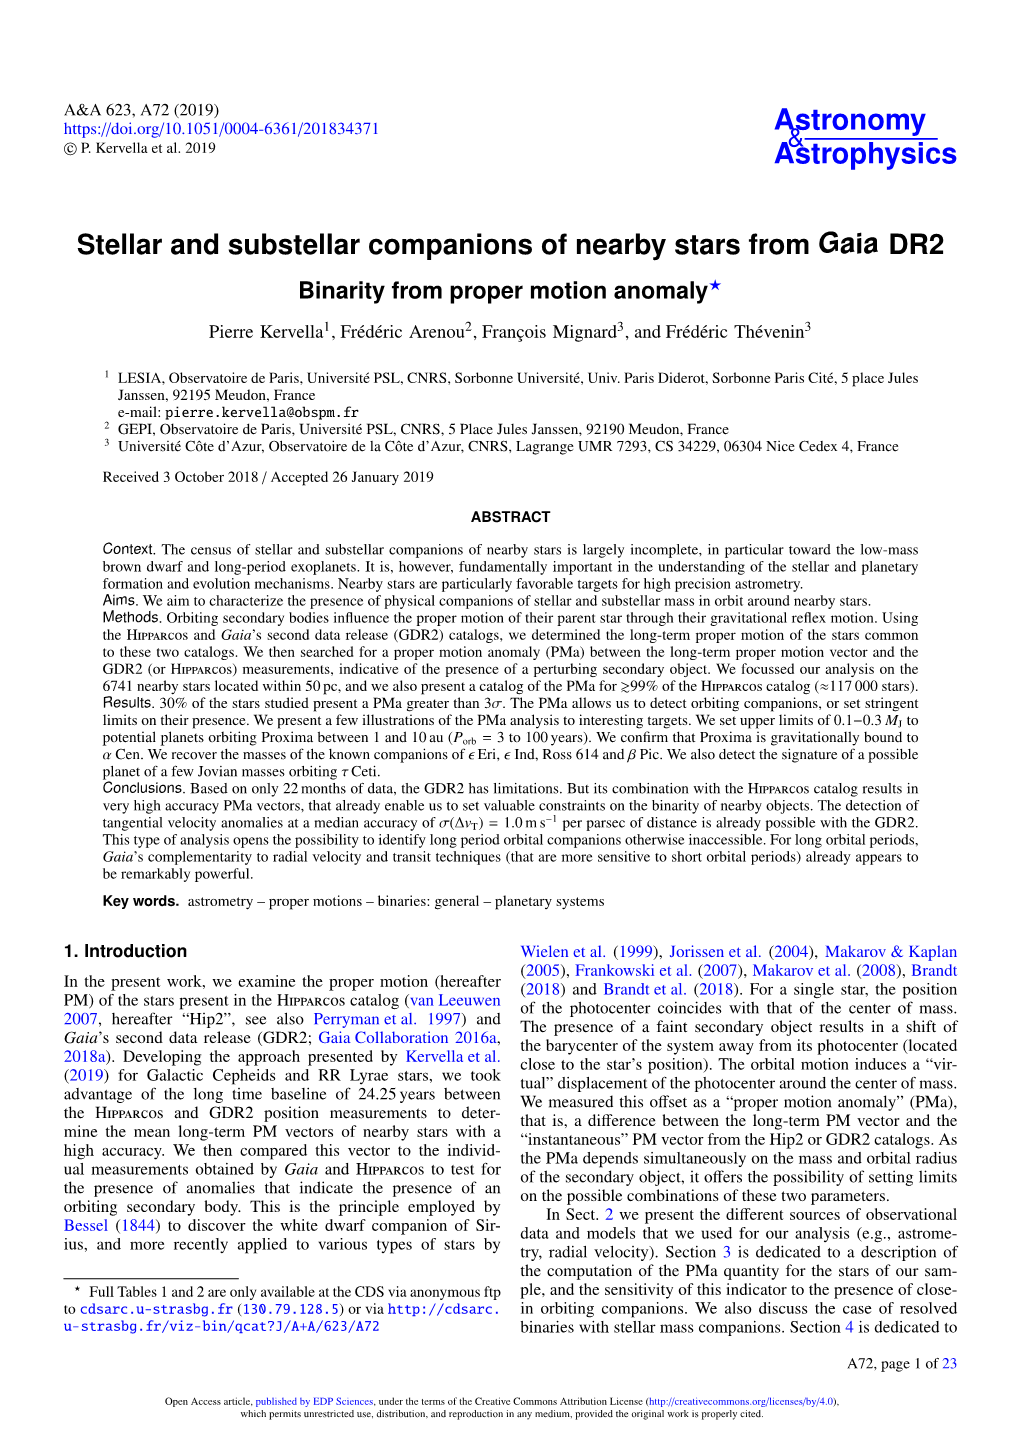 Stellar and Substellar Companions of Nearby Stars from Gaia DR2 Binarity from Proper Motion Anomaly?